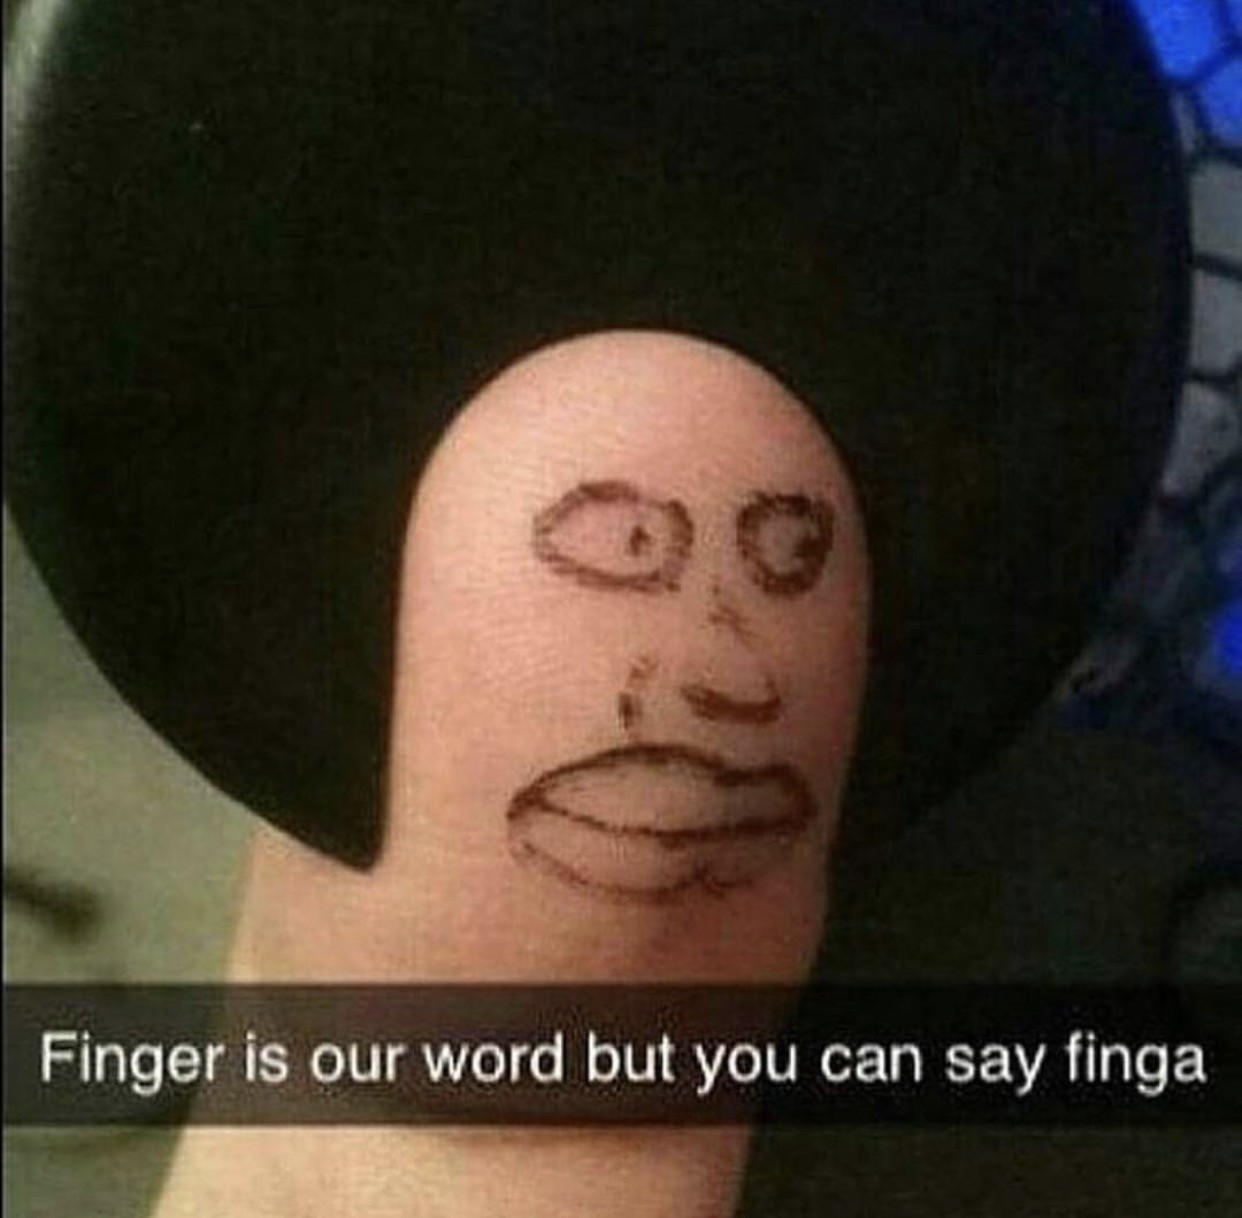 finger is our word but you can say finga - Finger is our word but you can say finga